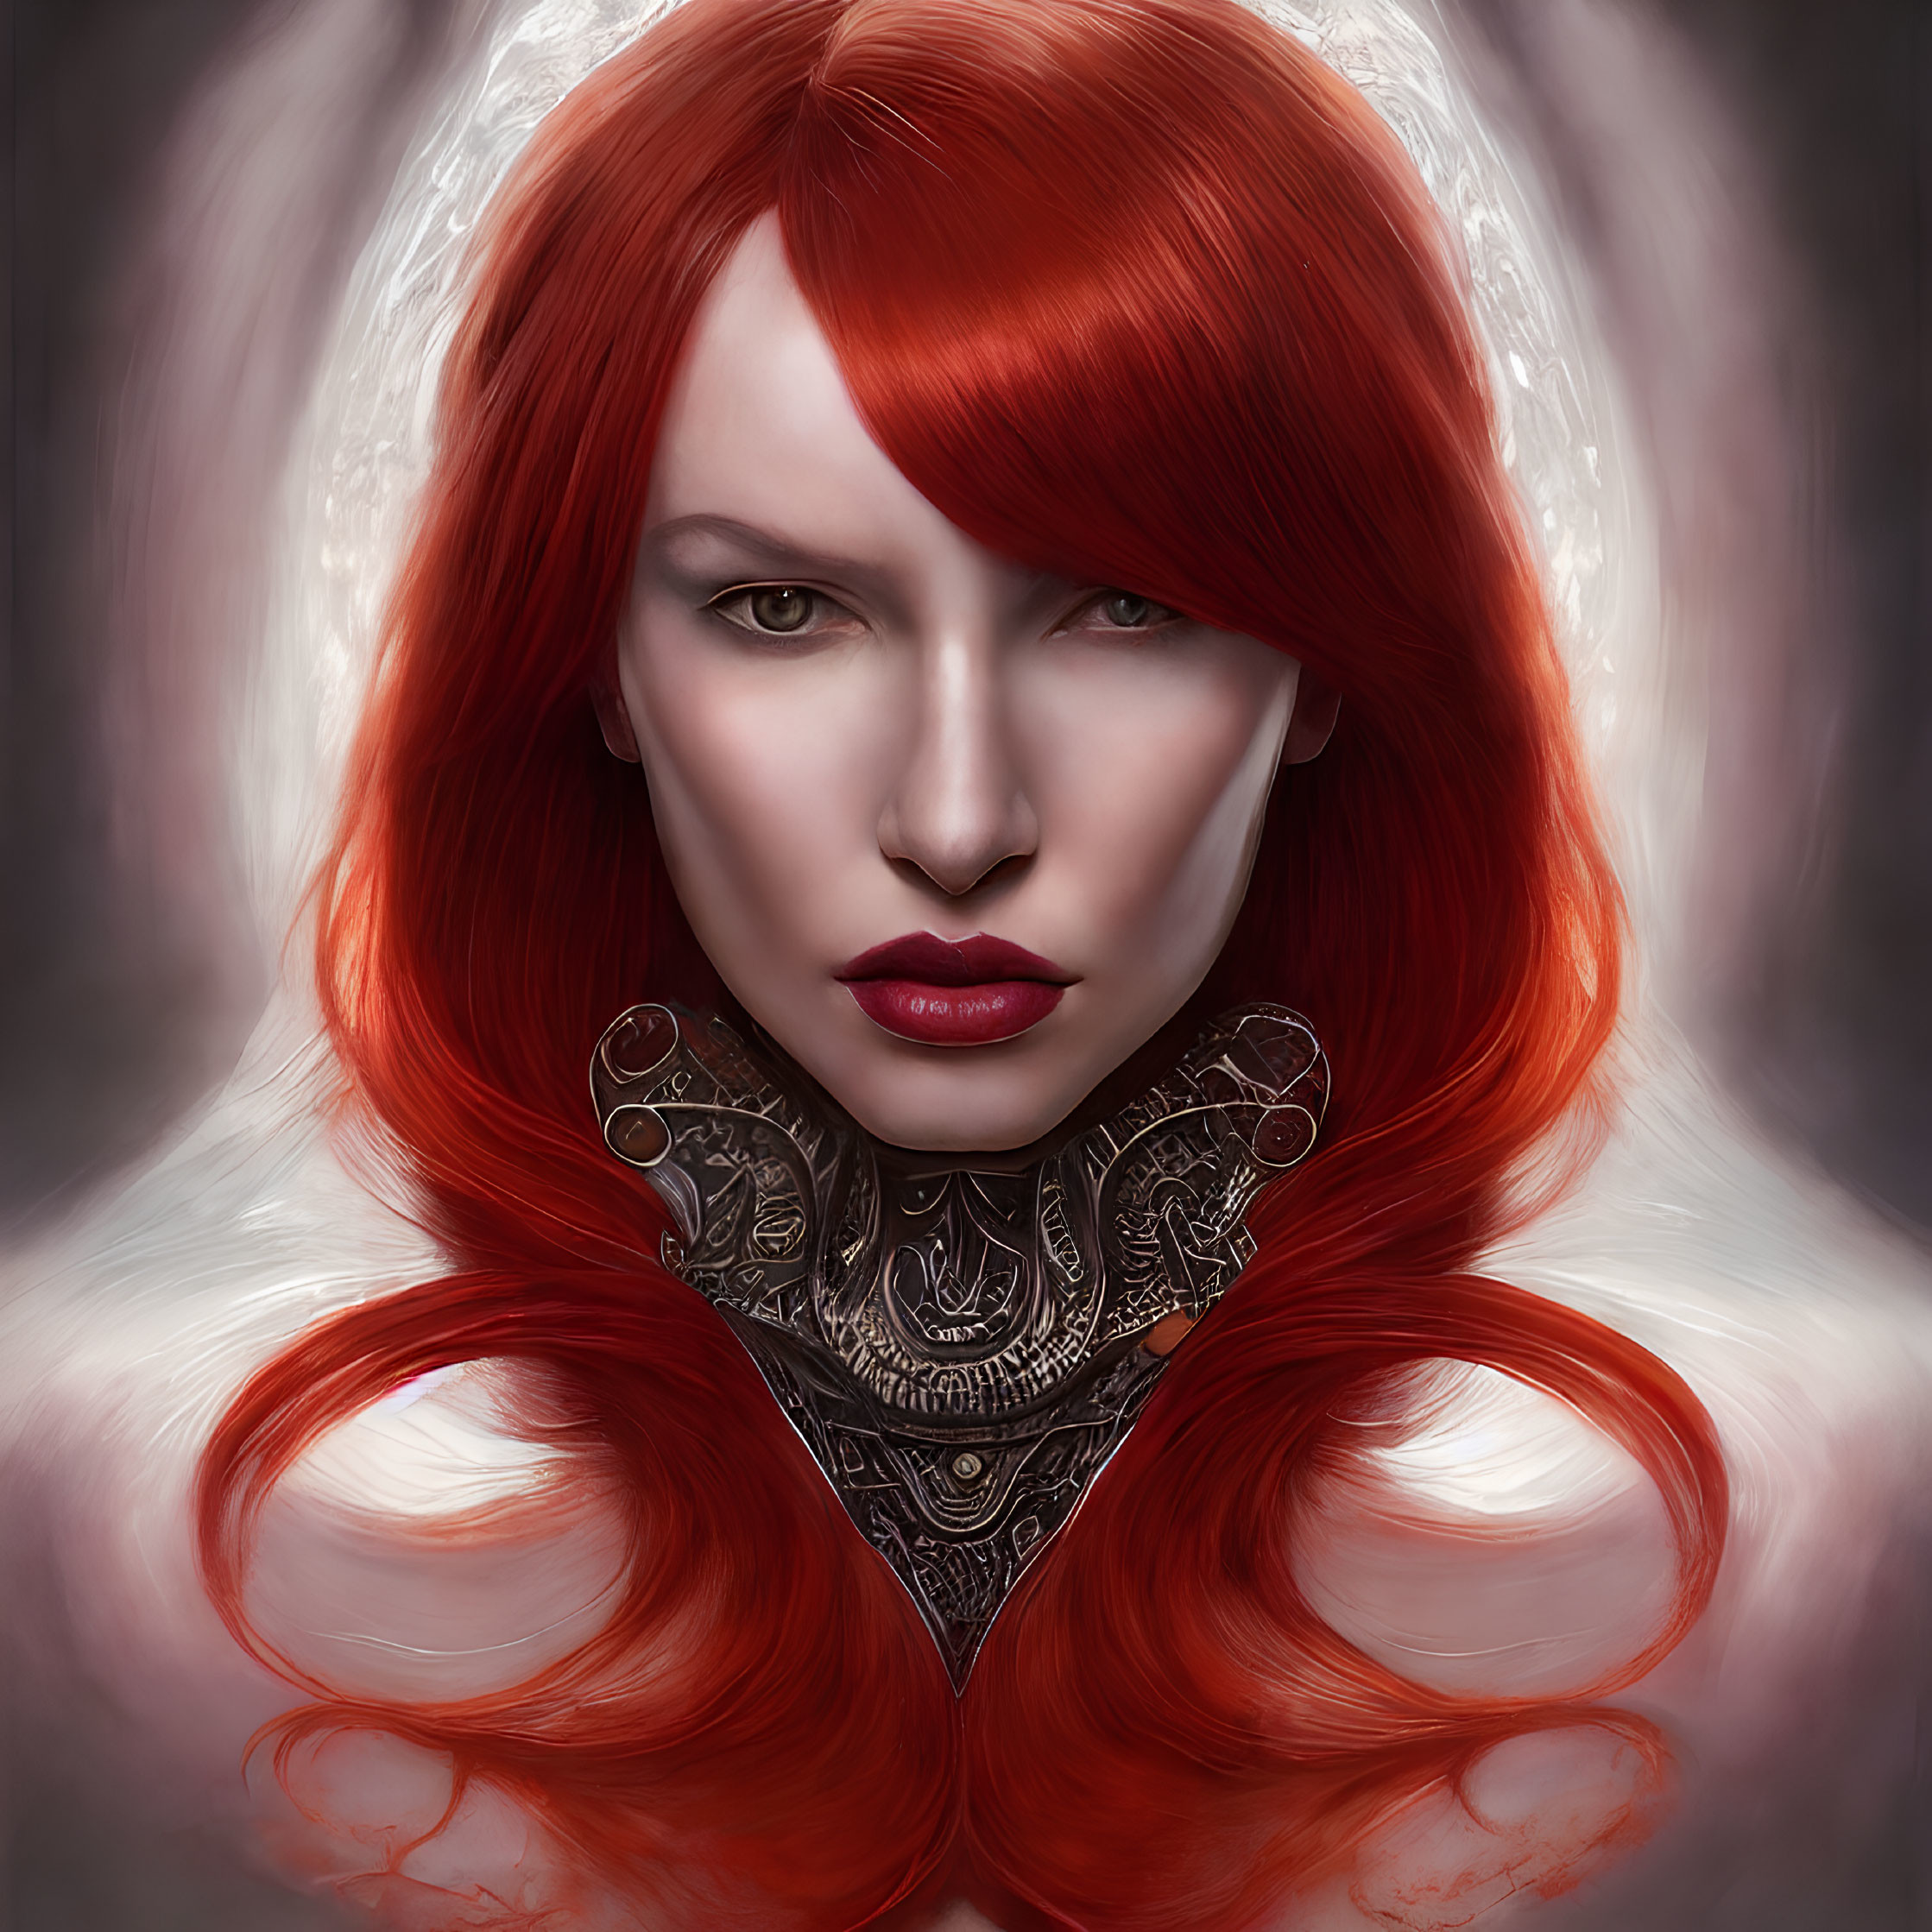 Digital artwork: Woman with red hair, pale skin, bold lips, metallic collar on blurred background